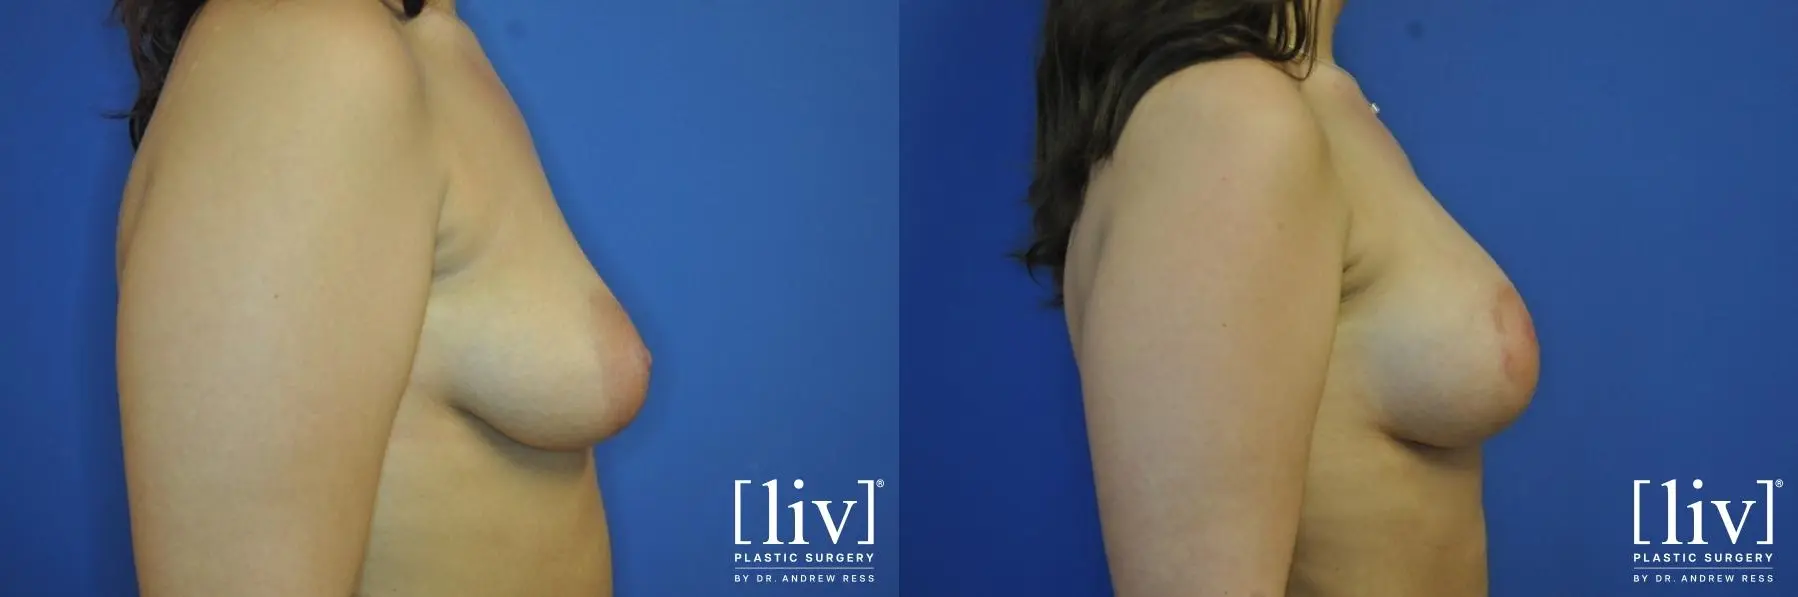 Breast Lift And Augmentation: Patient 5 - Before and After 5